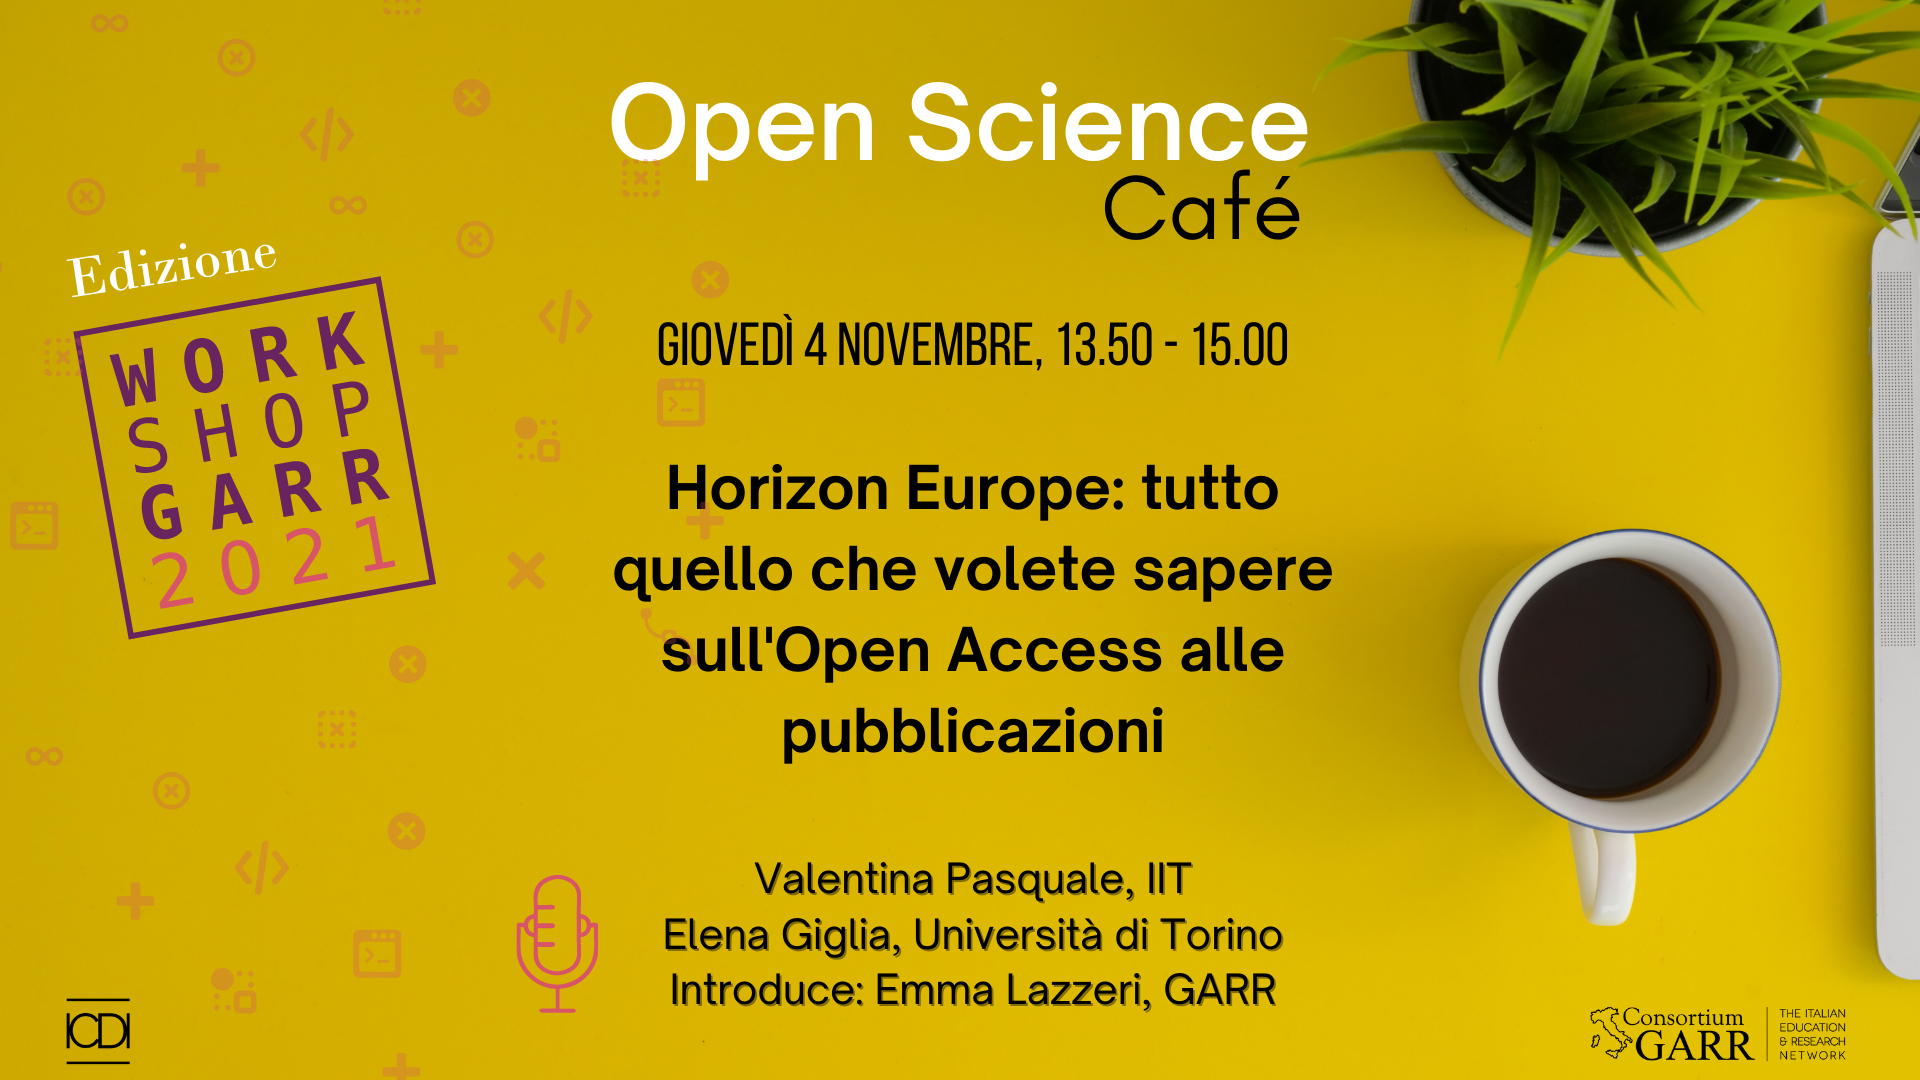 HORIZON EUROPE: ALL YOU NEED TO KNOW ABOUT THE OPEN ACCESS TO PUBBLICATIONS